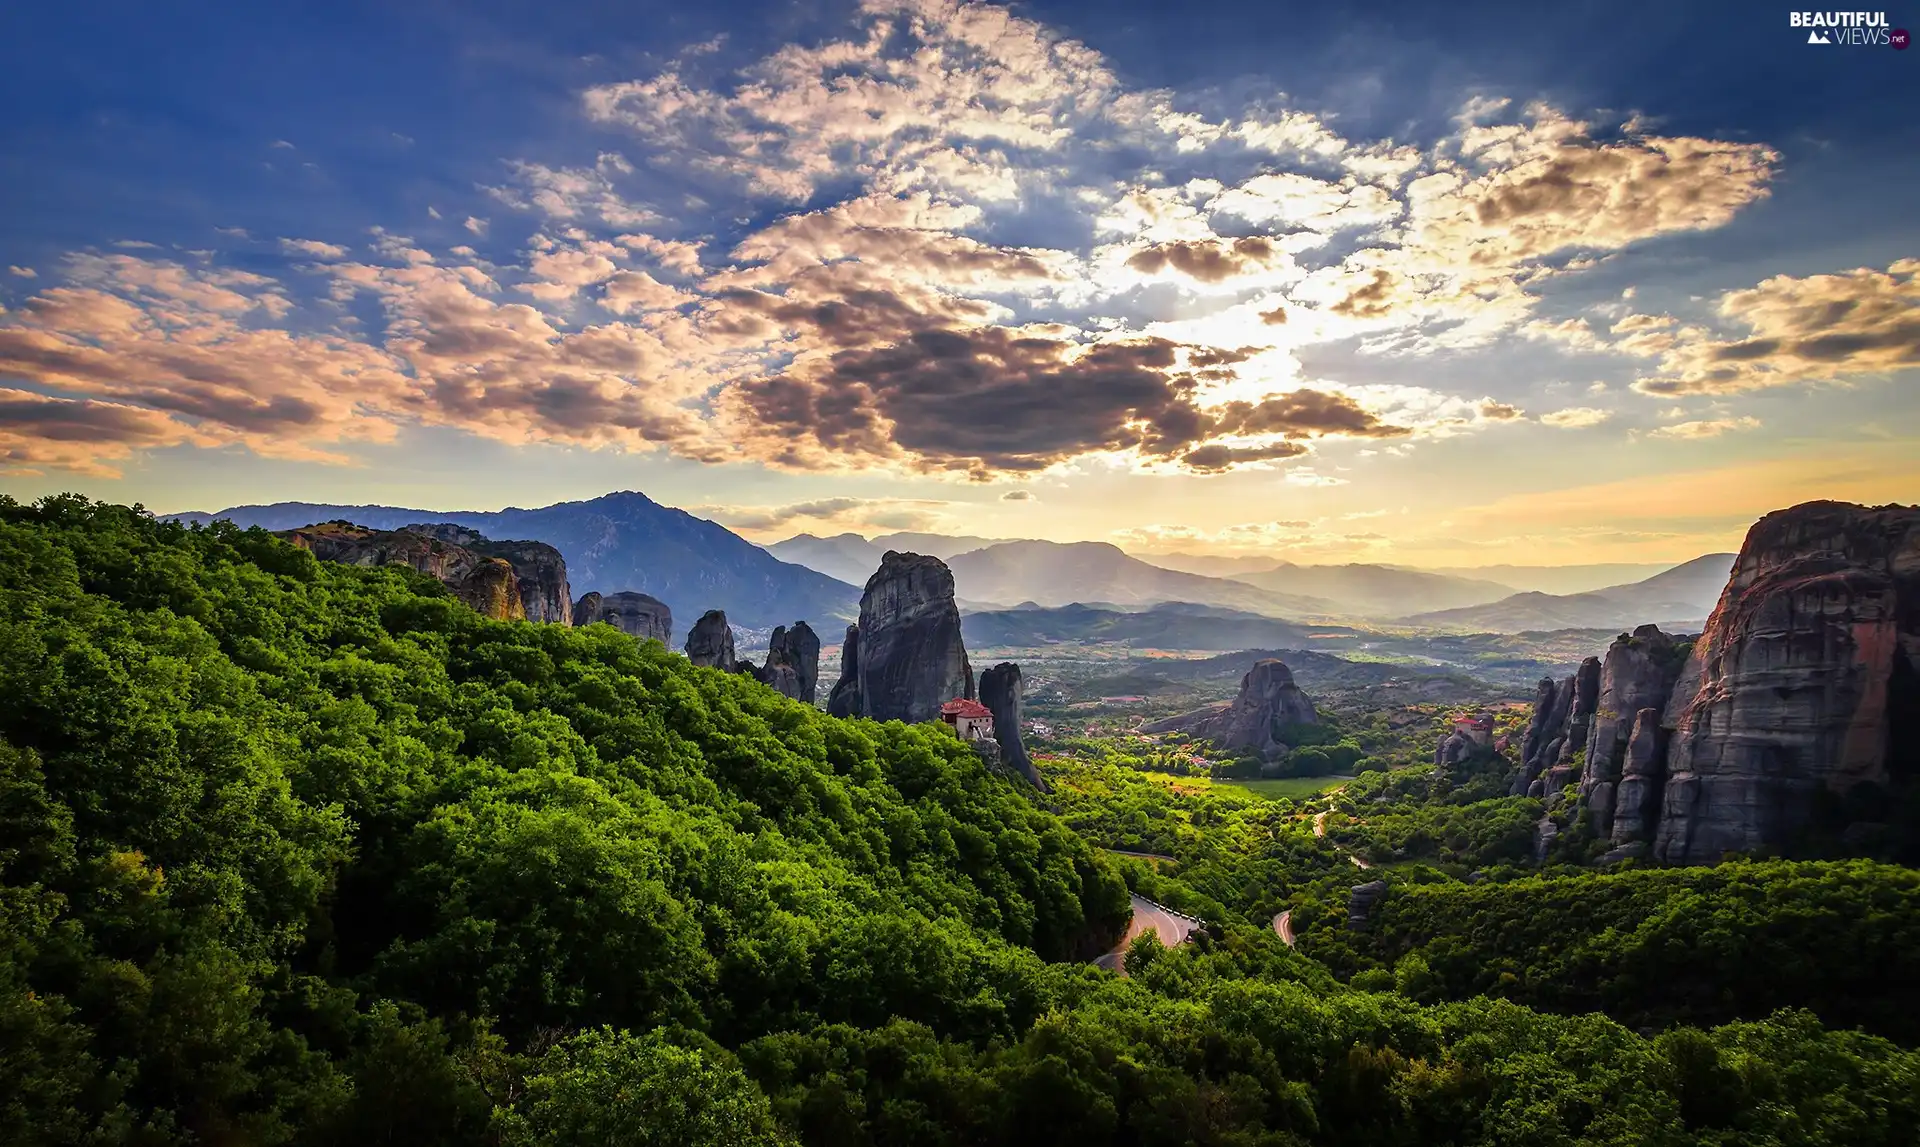 Meteora Massif, Greece, rocks, Thessaly, trees, viewes, Monasteries, Way, Plain of Thessaly